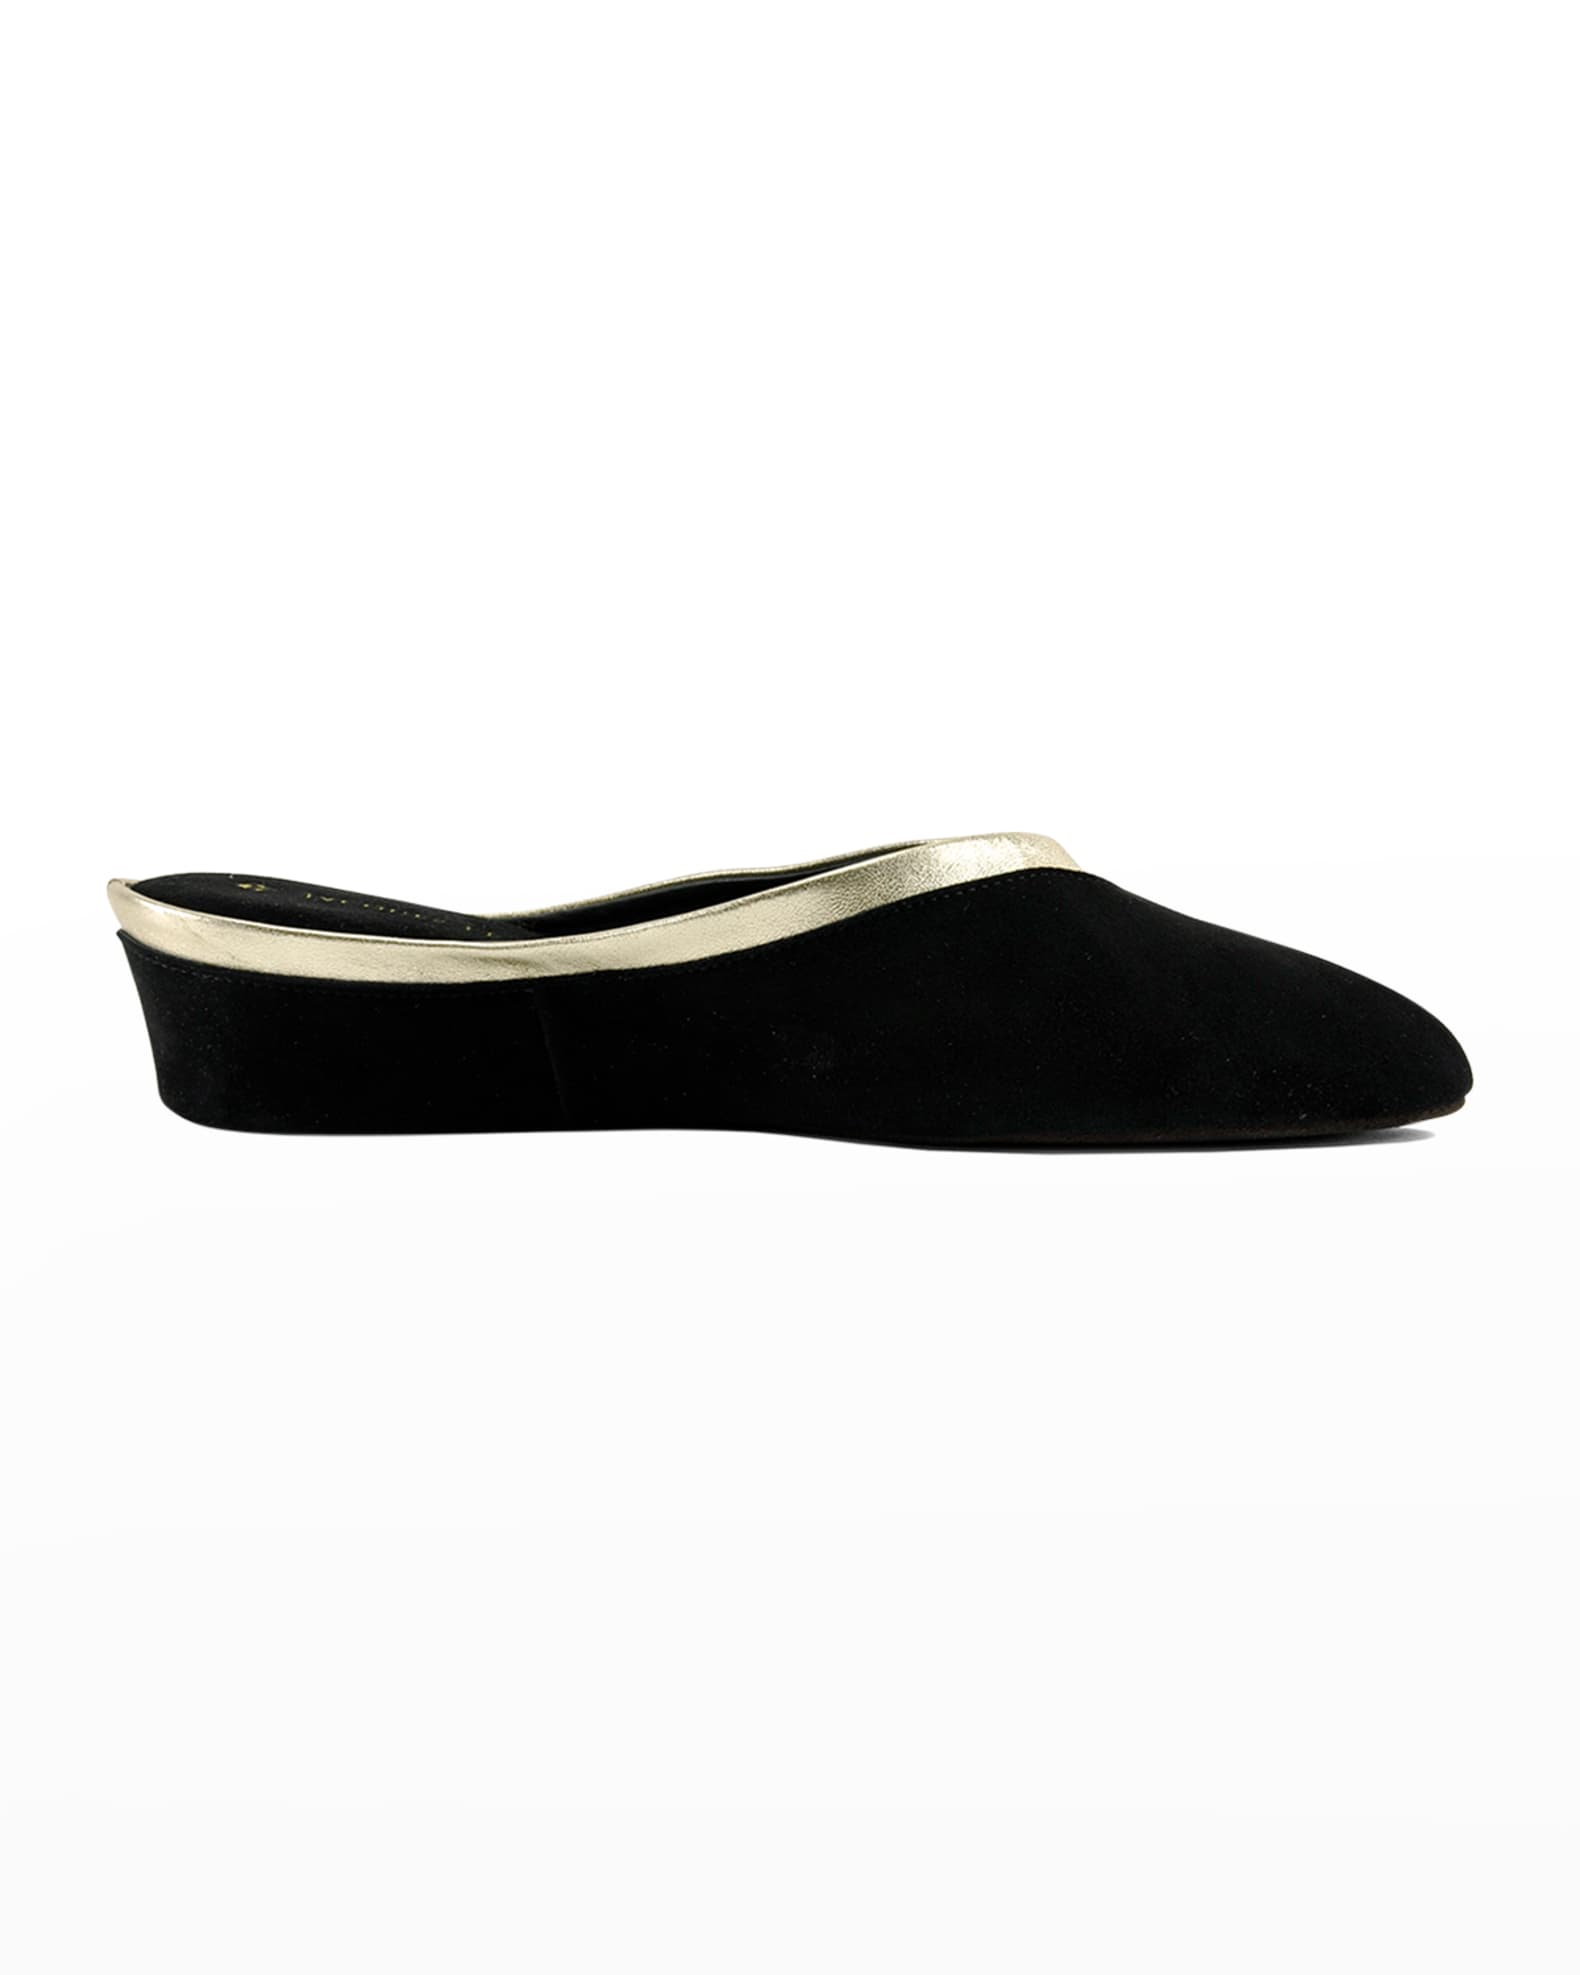 Jacques Levine Suede Wedge Mule Slippers | Neiman Marcus